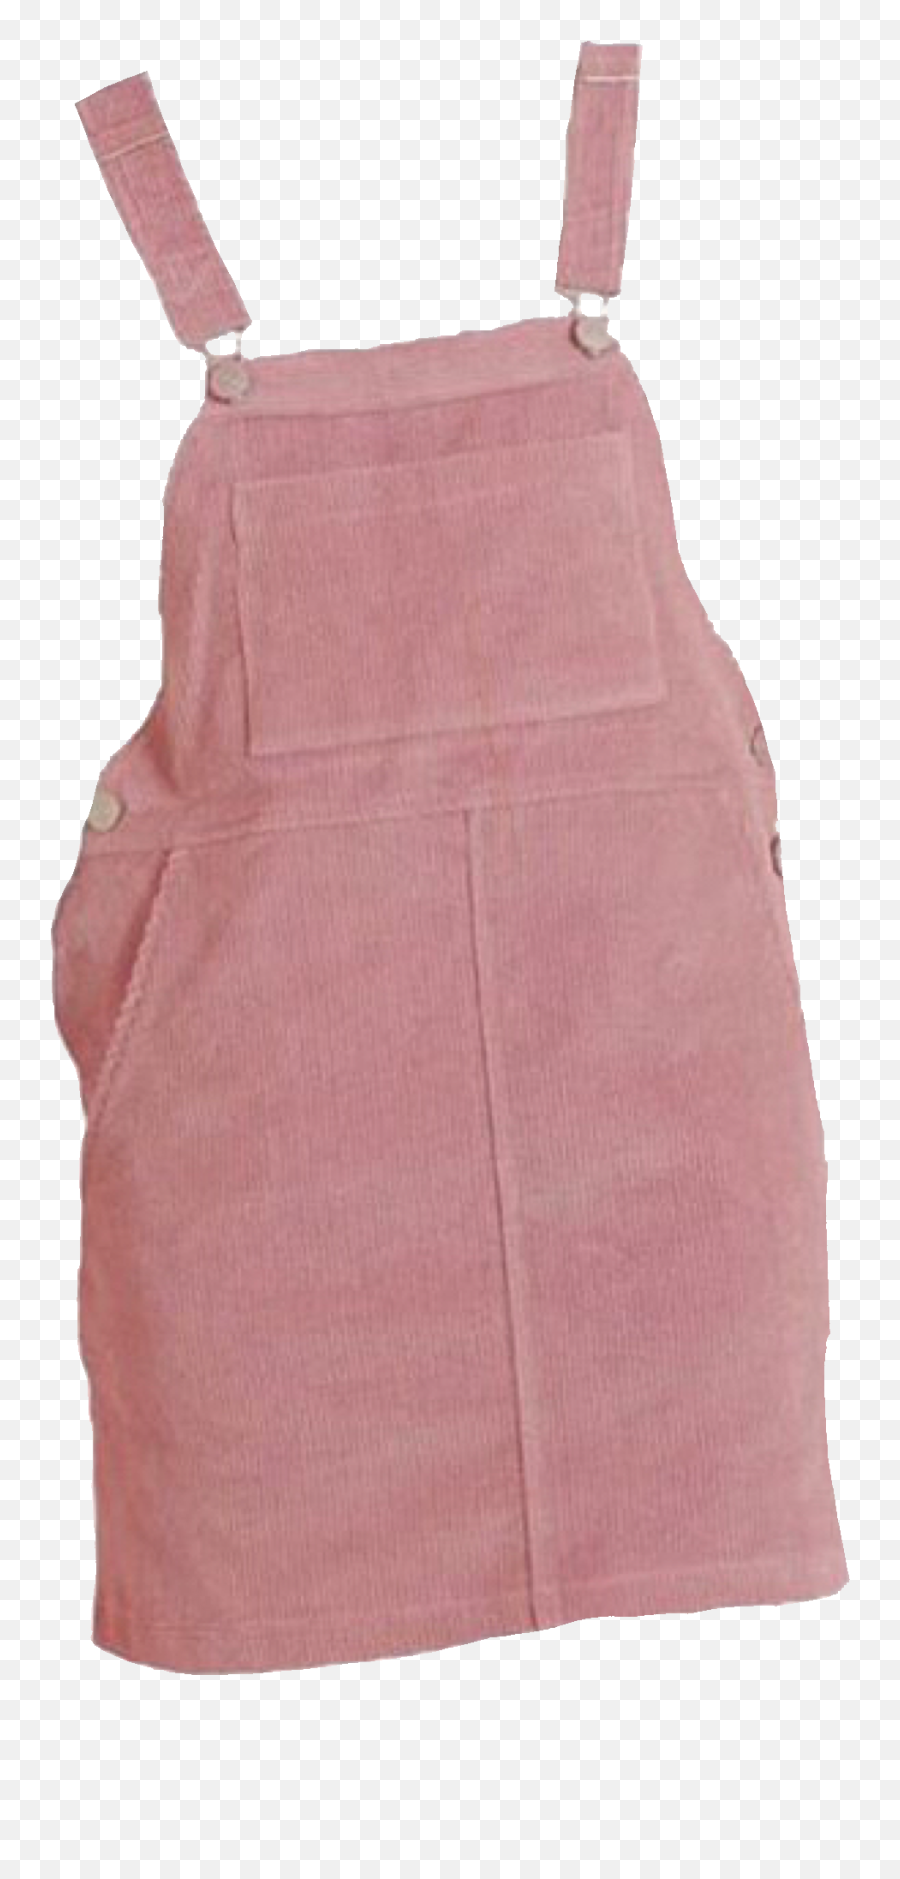 Rose Overall Skirt Png